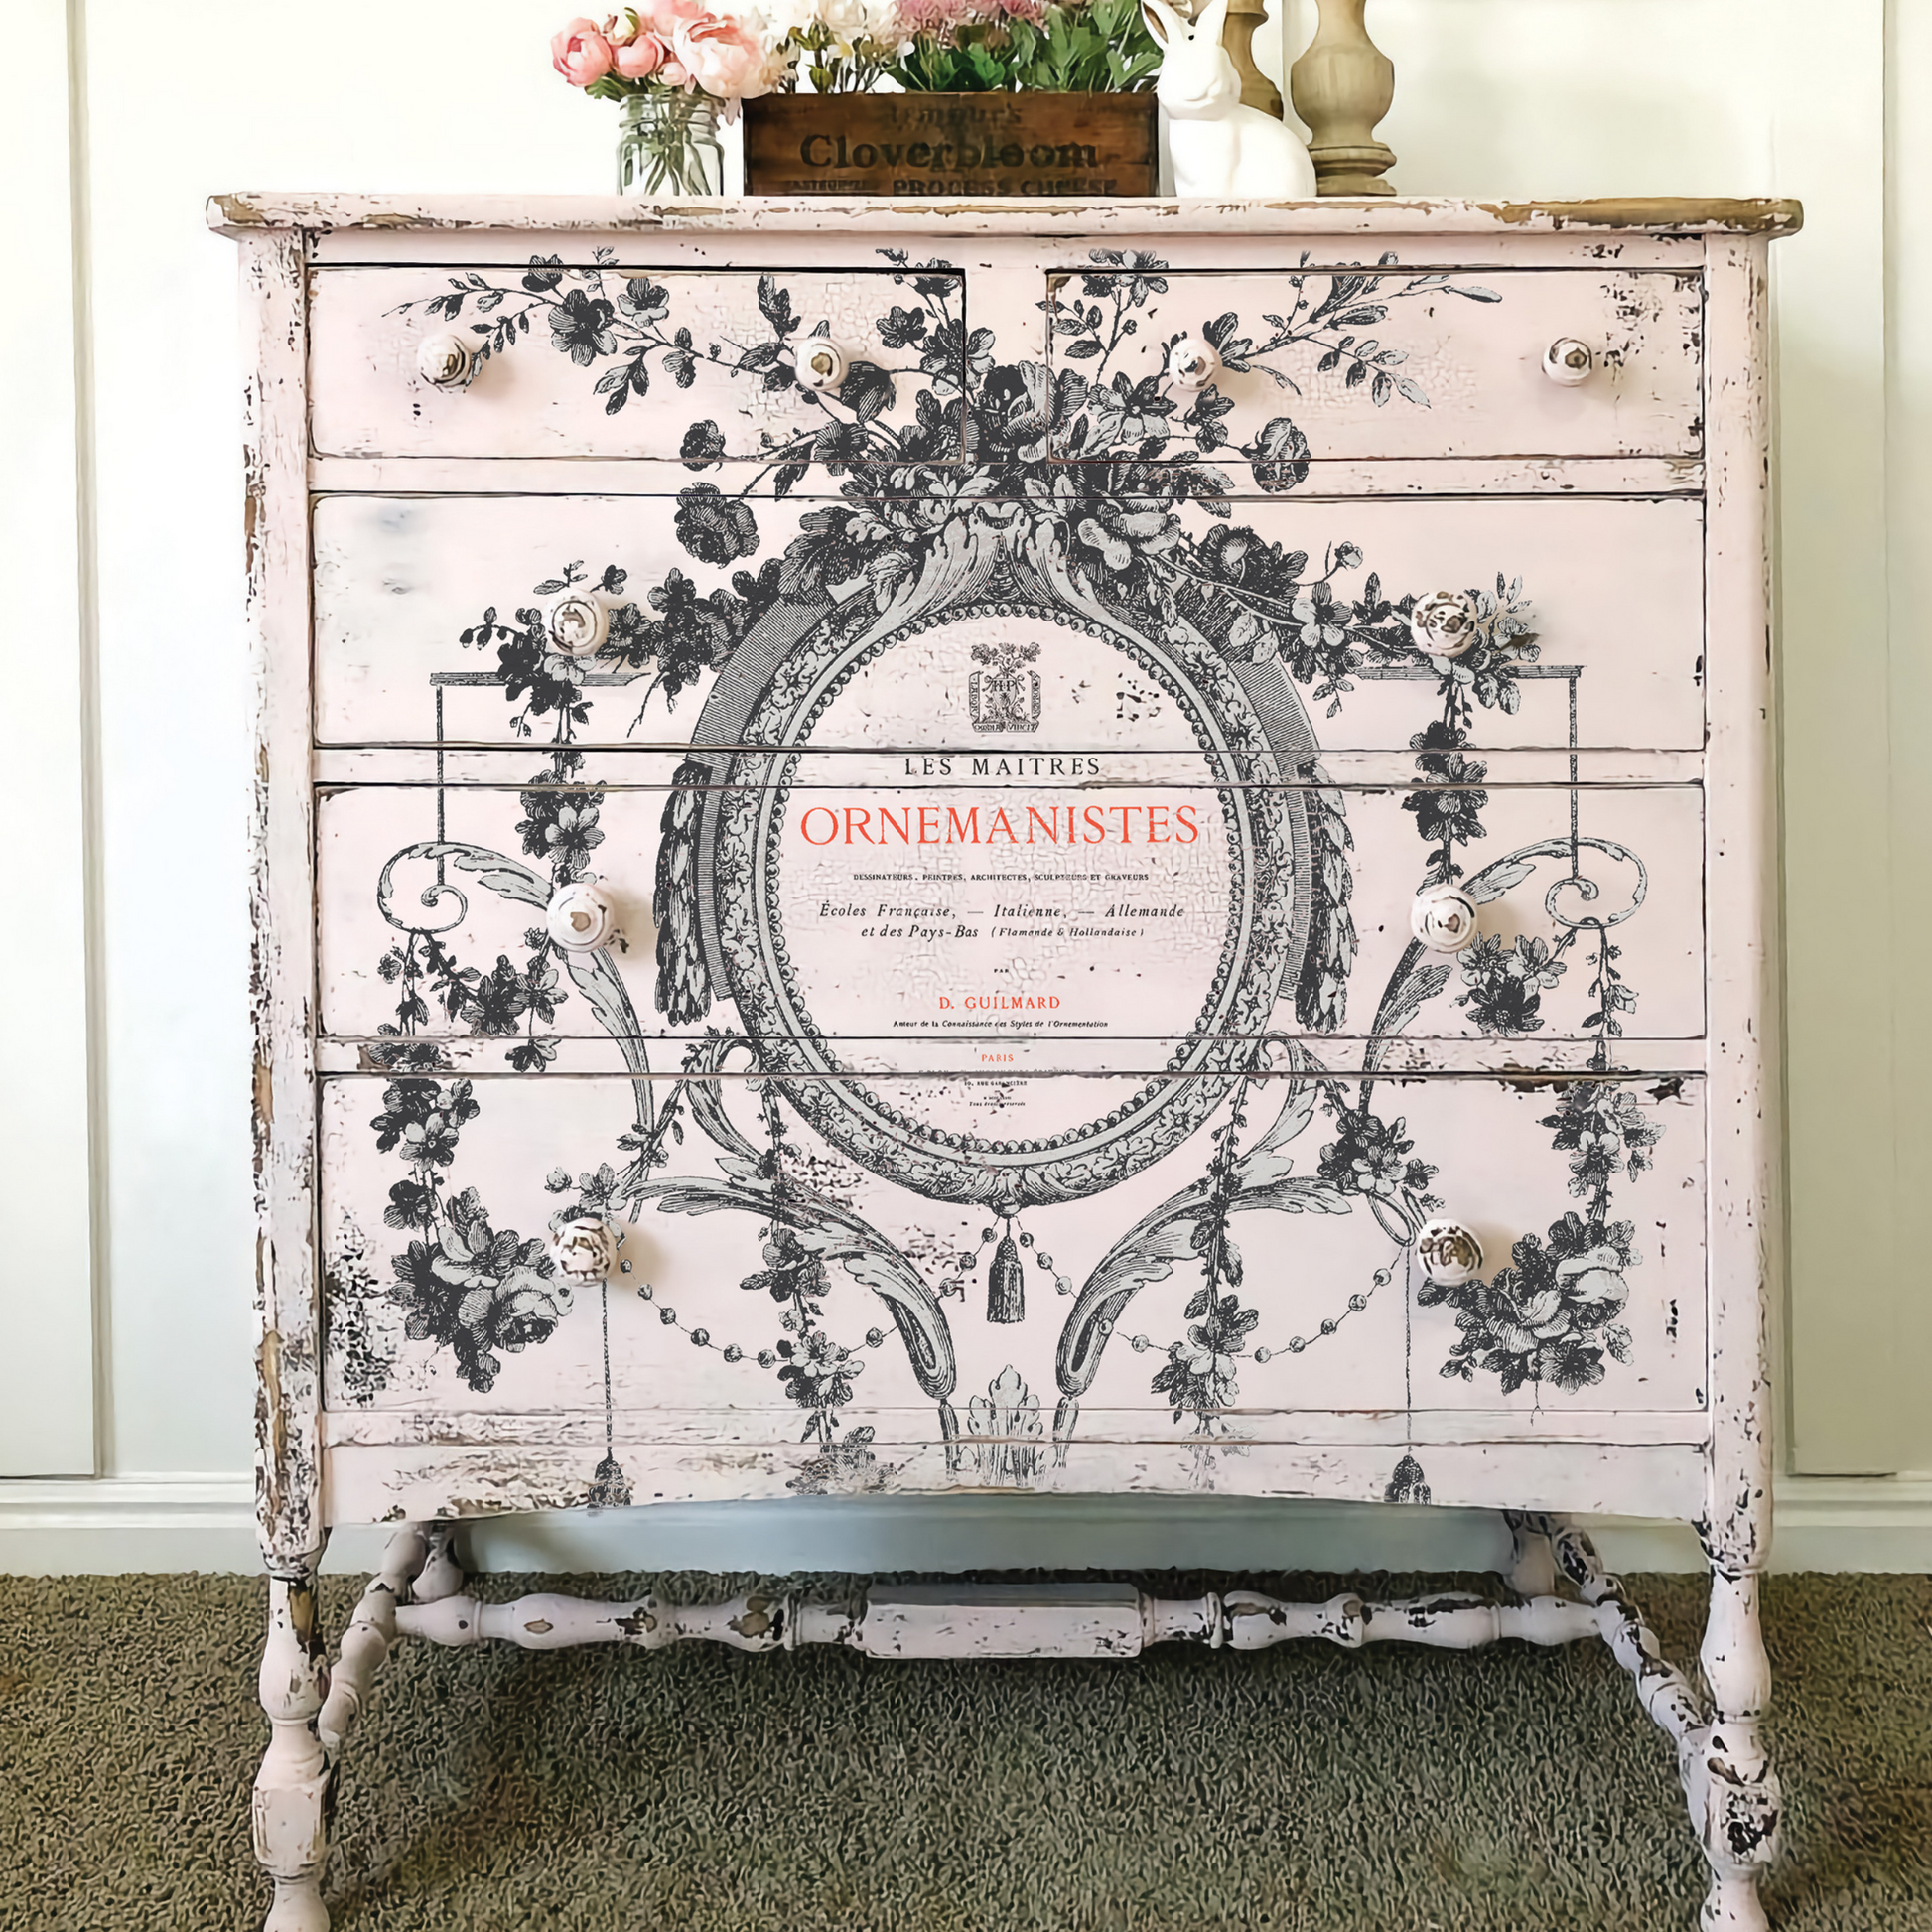 Cosette IOD rub-on furniture transfer by Iron Orchid Designs. Example #3. Includes eight 12" x 16" sheets. Available at Milton's Daughter.